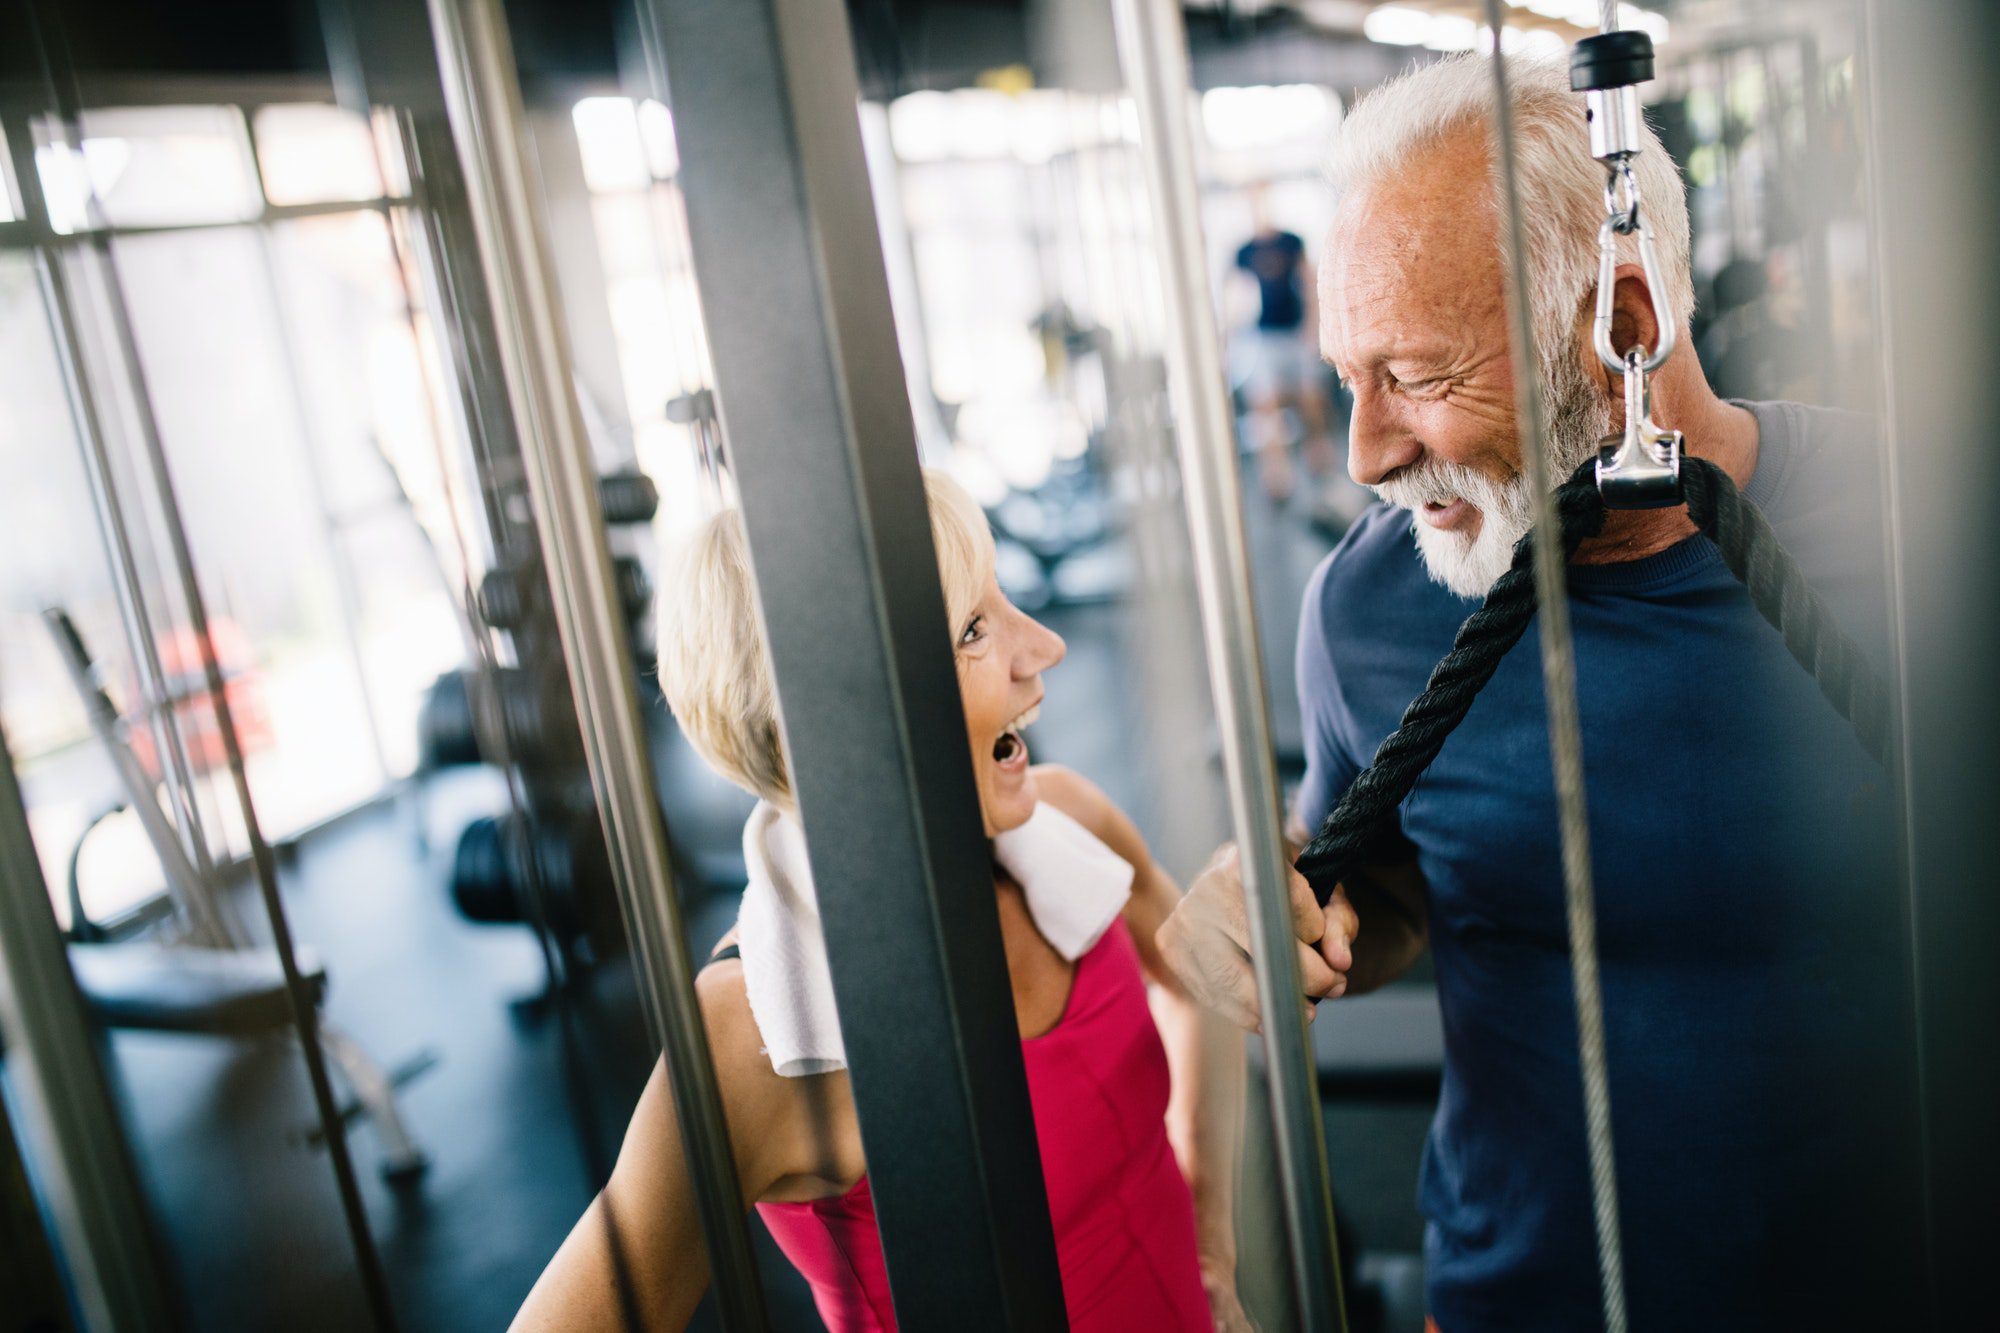 Couple at a Gym enjoying their Medicare Medical Savings account that offers benefits like a gym membership.